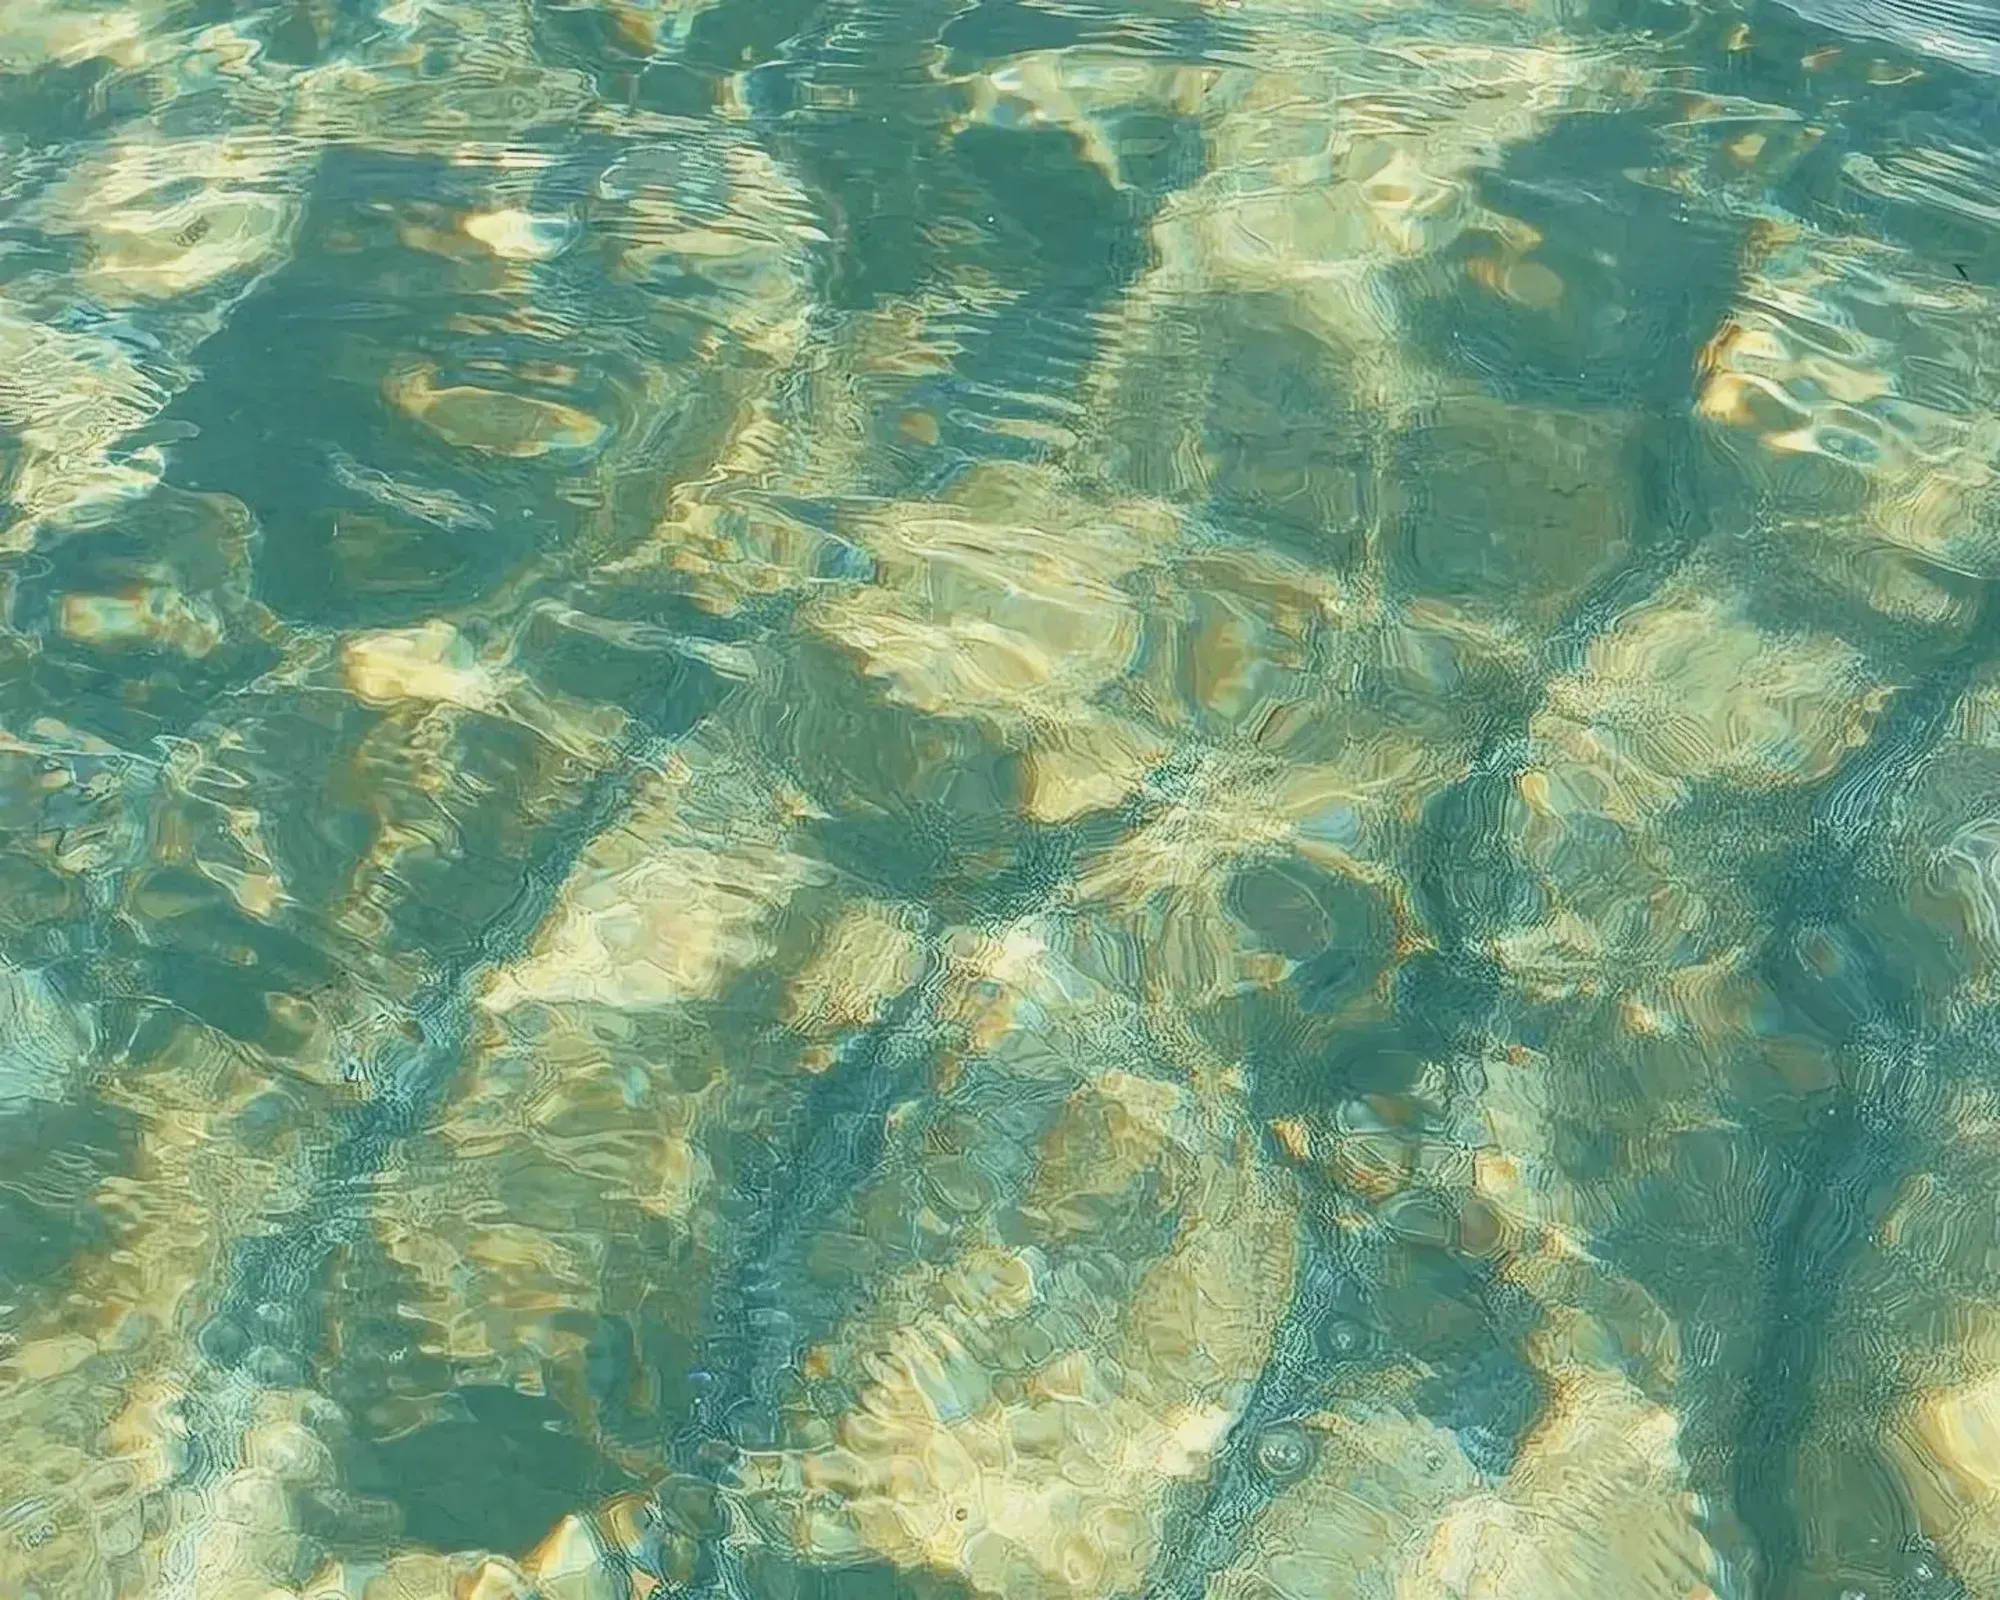 Clear water with underwater reef and dancing ripples